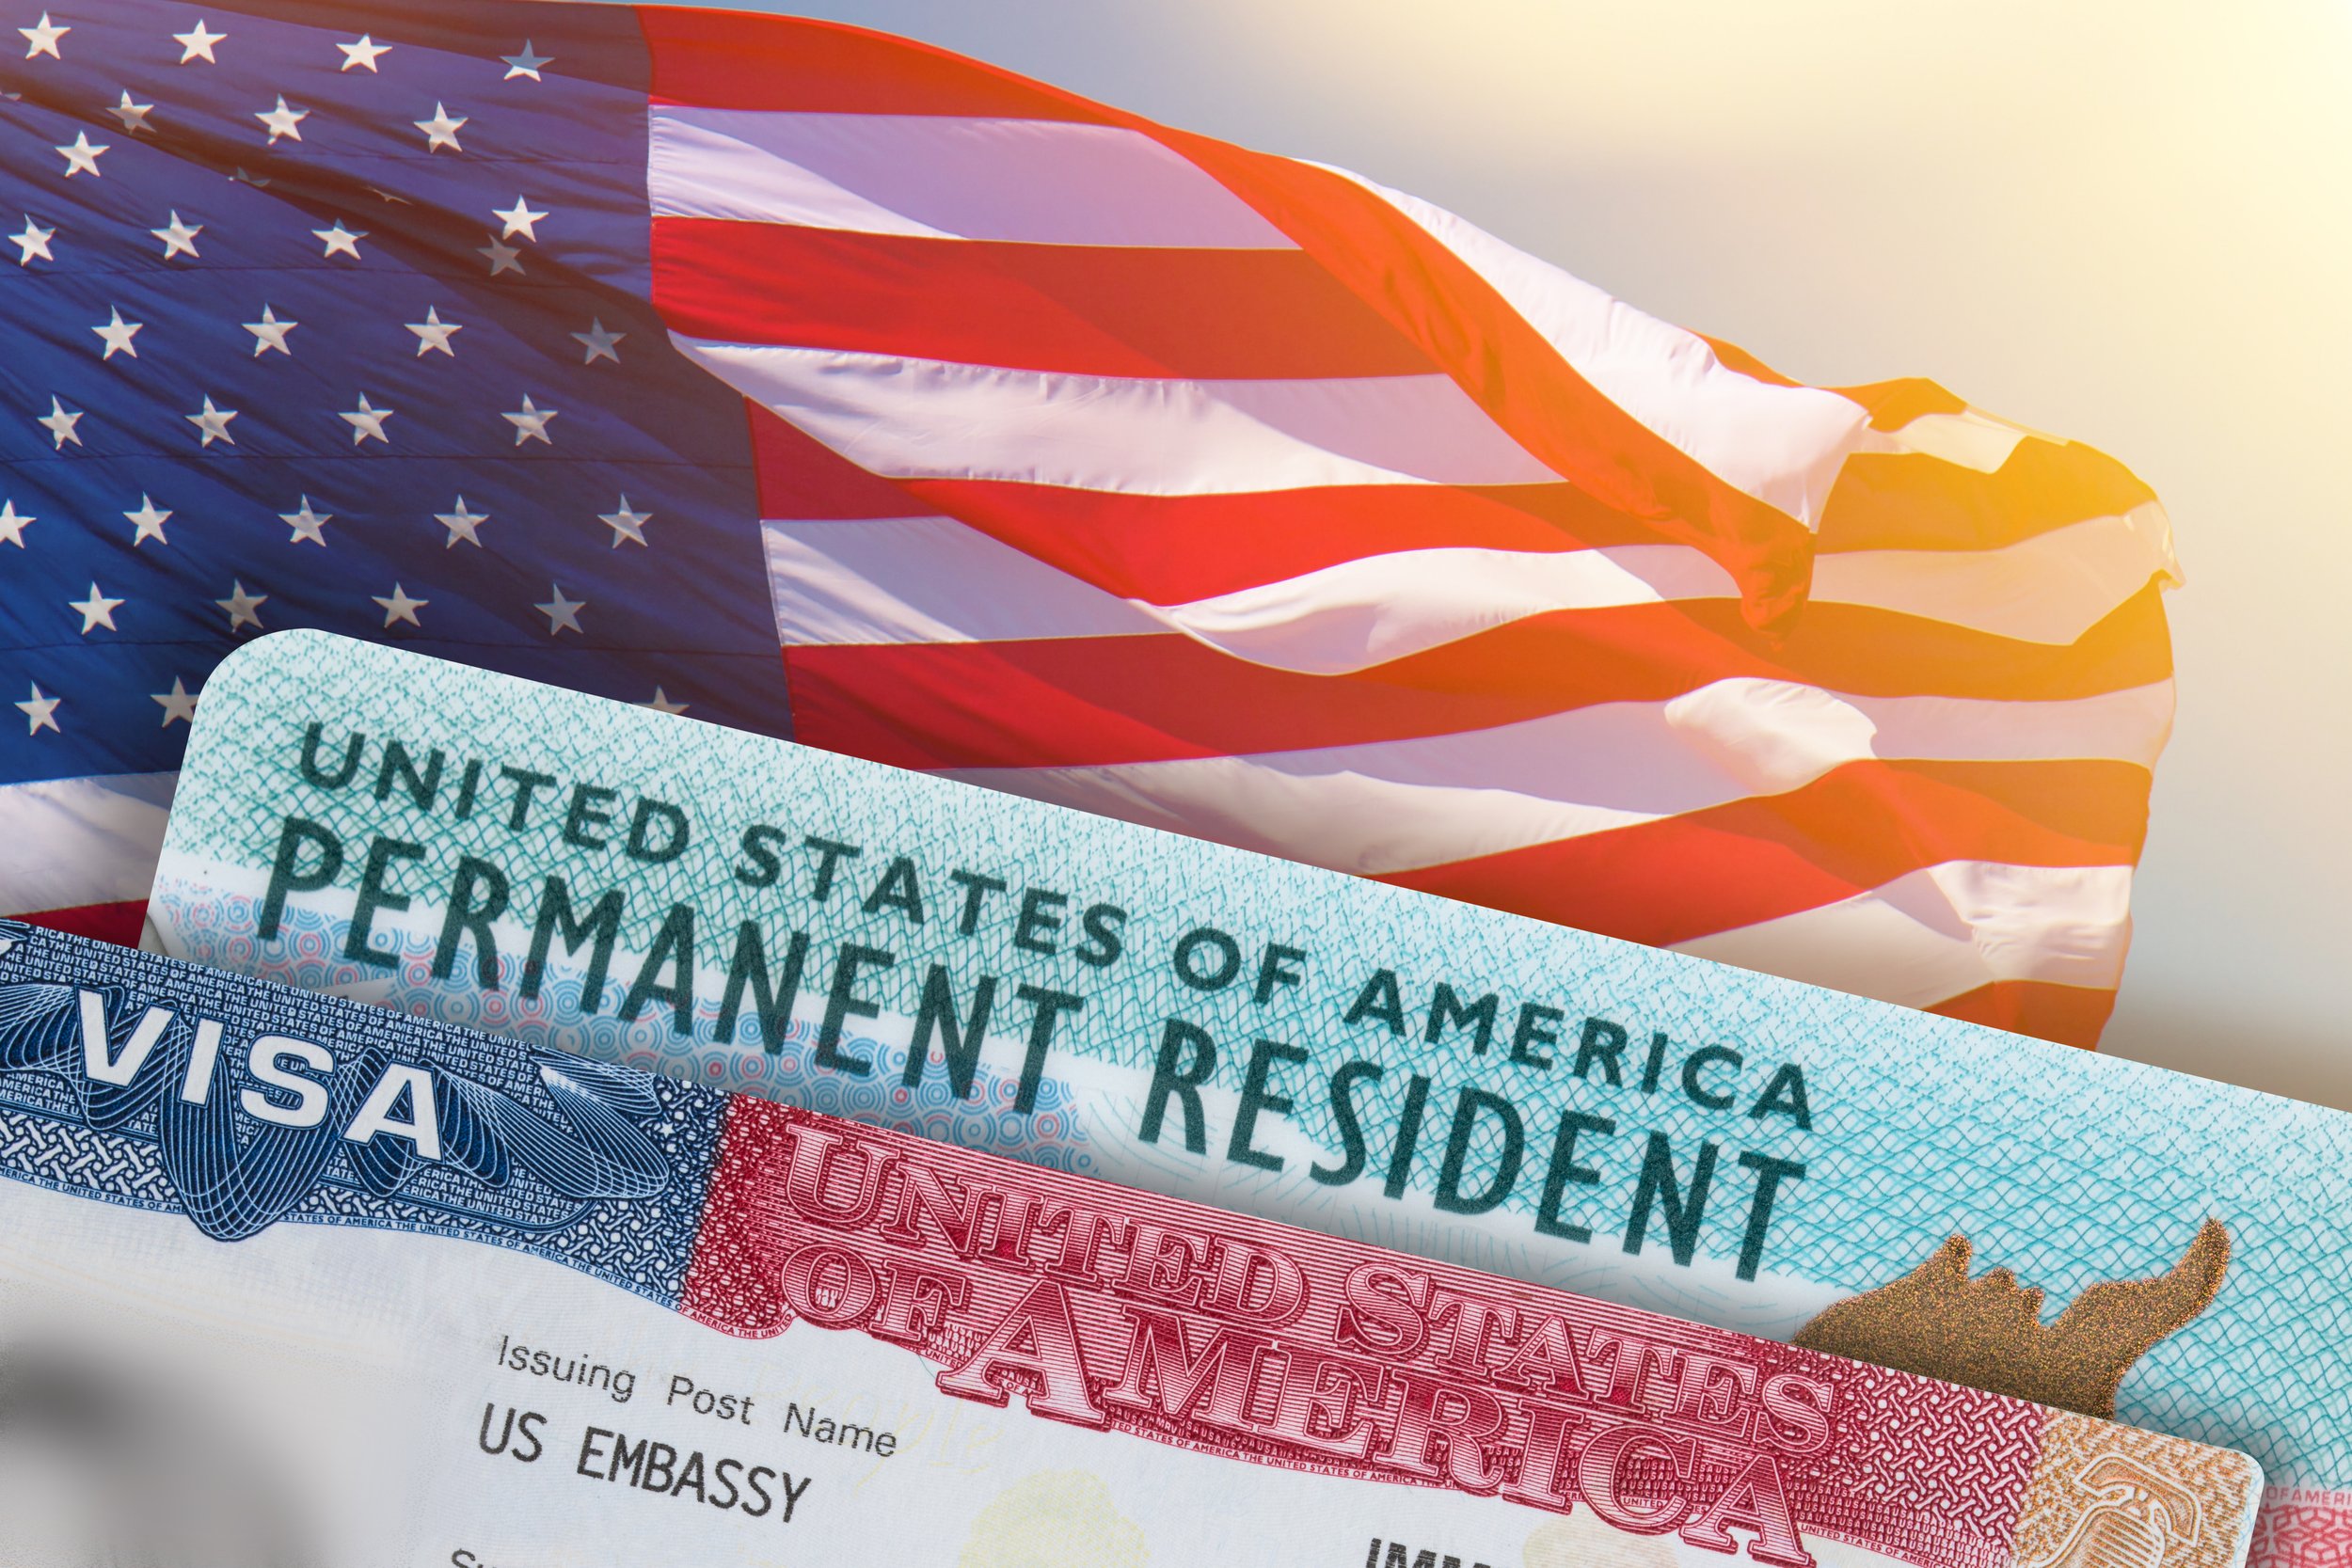 EB1 vs EB2 Green Card  Differences, Processing Time [2023]